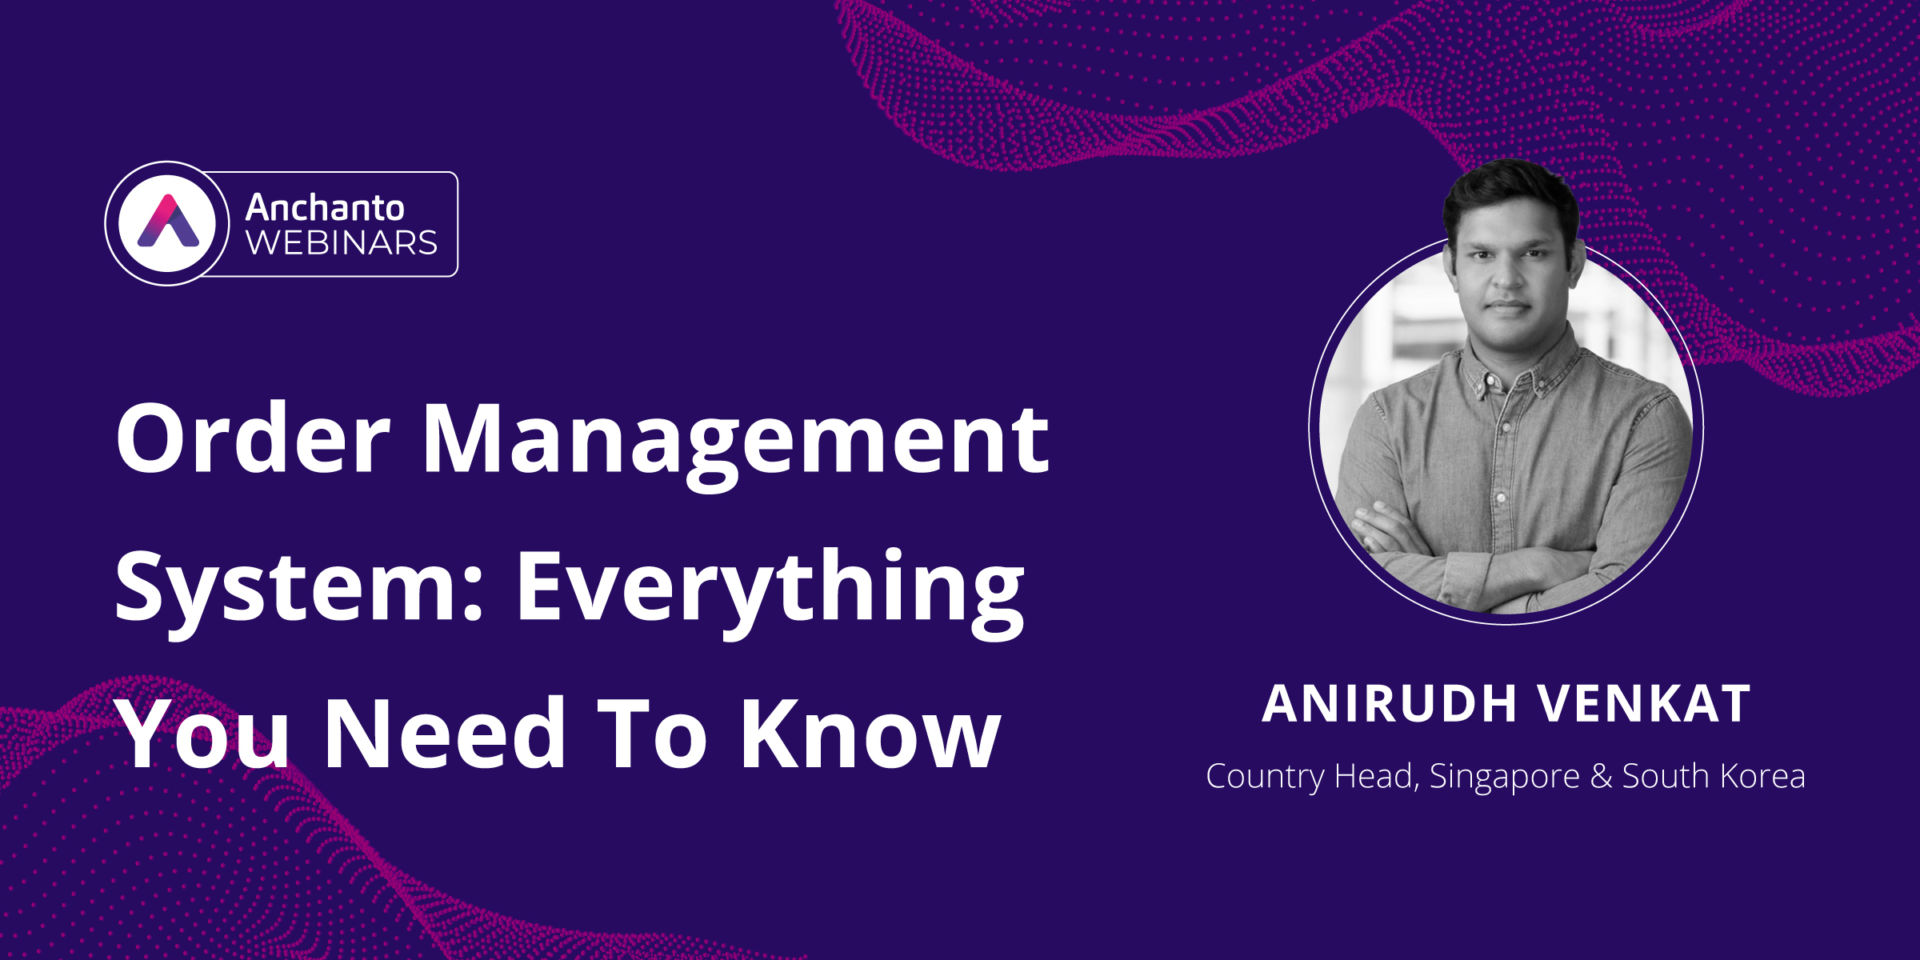 Order Management System: Everything You Need to Know